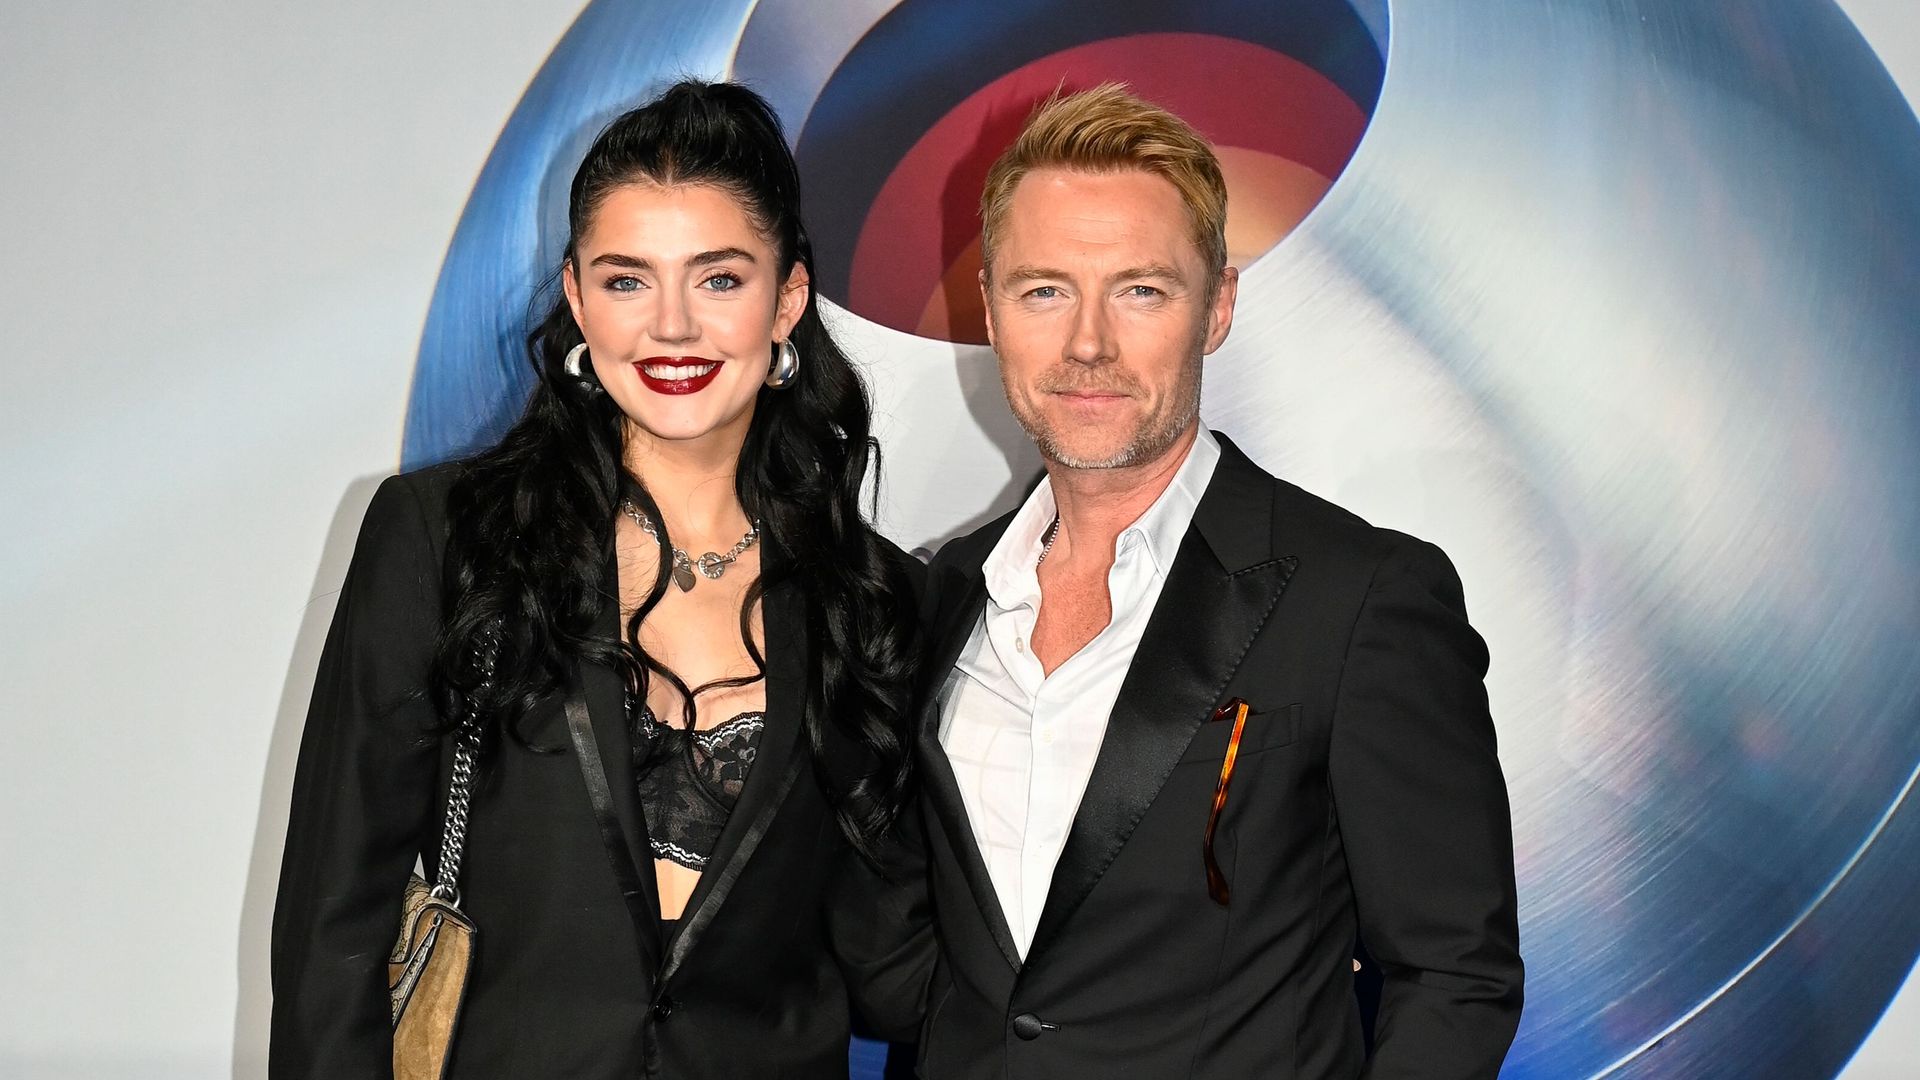 Ronan Keating's daughter Missy is the ultimate vixen in rare appearance with dad